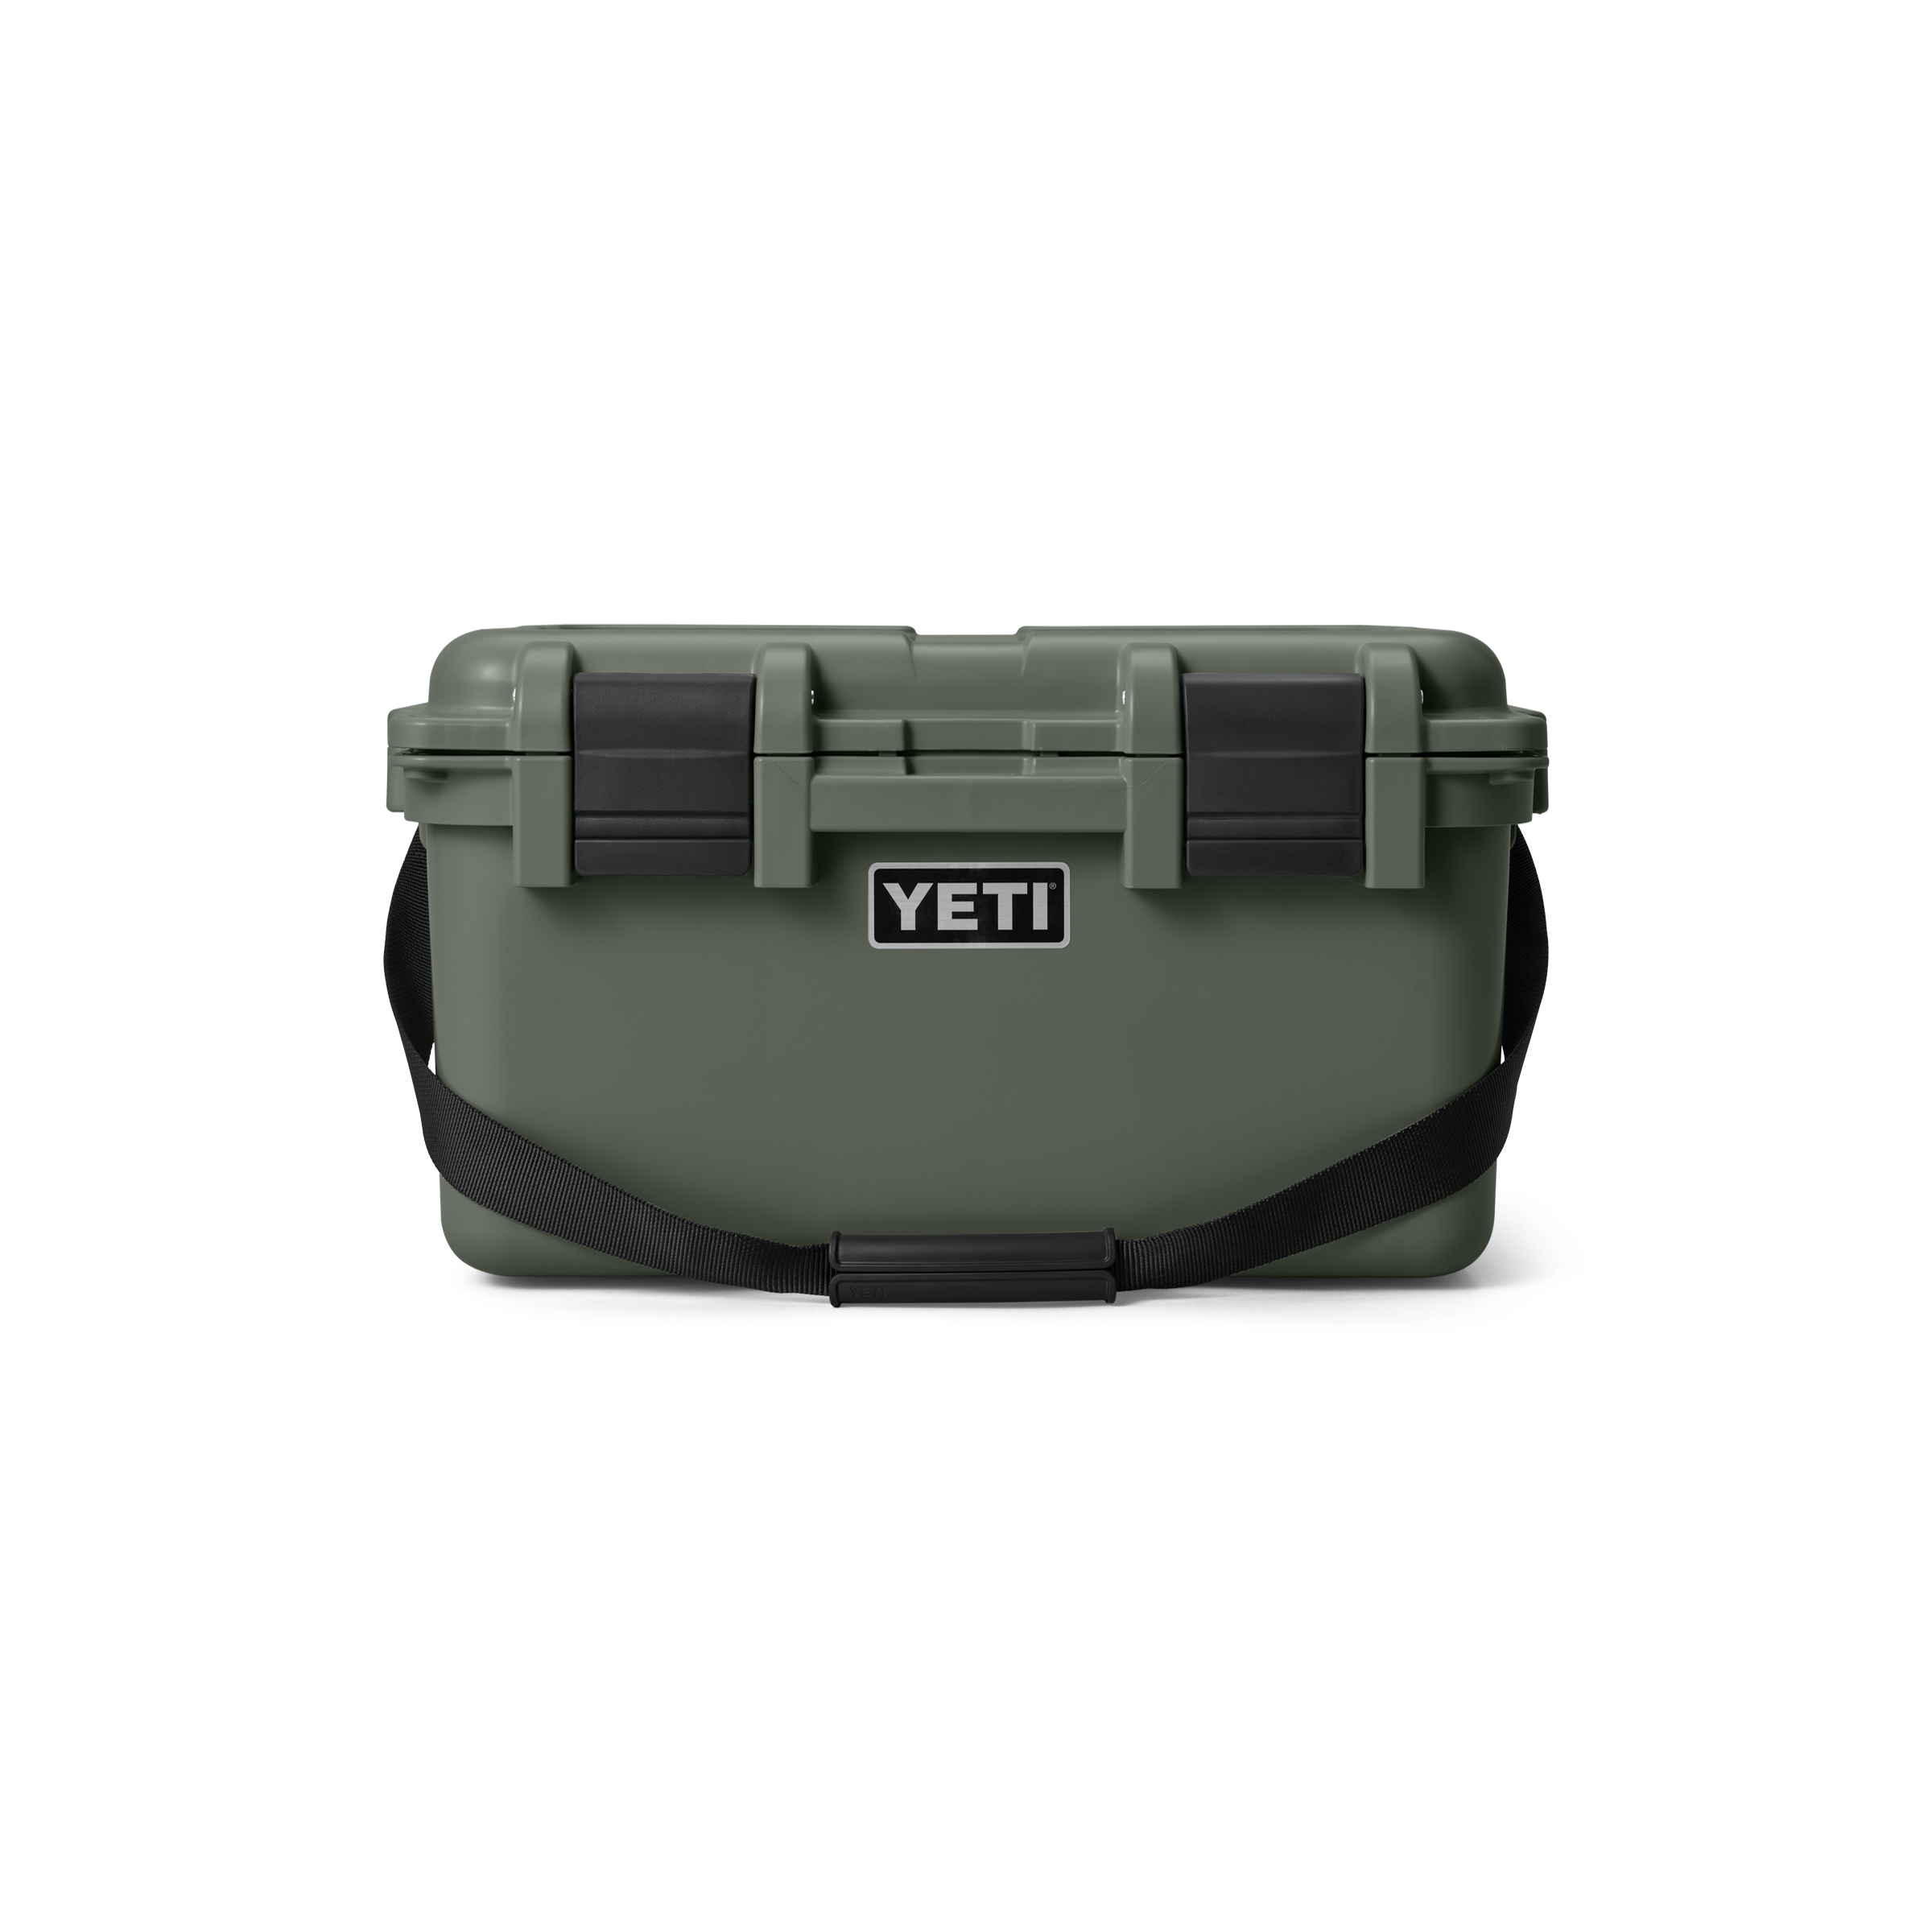 https://cdn.shopify.com/s/files/1/0513/4703/0171/files/220111_2H23_Color_Launch_site_studio_Hard_Goods_Loadout_GoBox_30_Camp_Green_Front_Closed_1202_Primary_B_2400x2400_fa8cd788-4807-4701-9e2a-92918807bc1a.png?v=1689795187